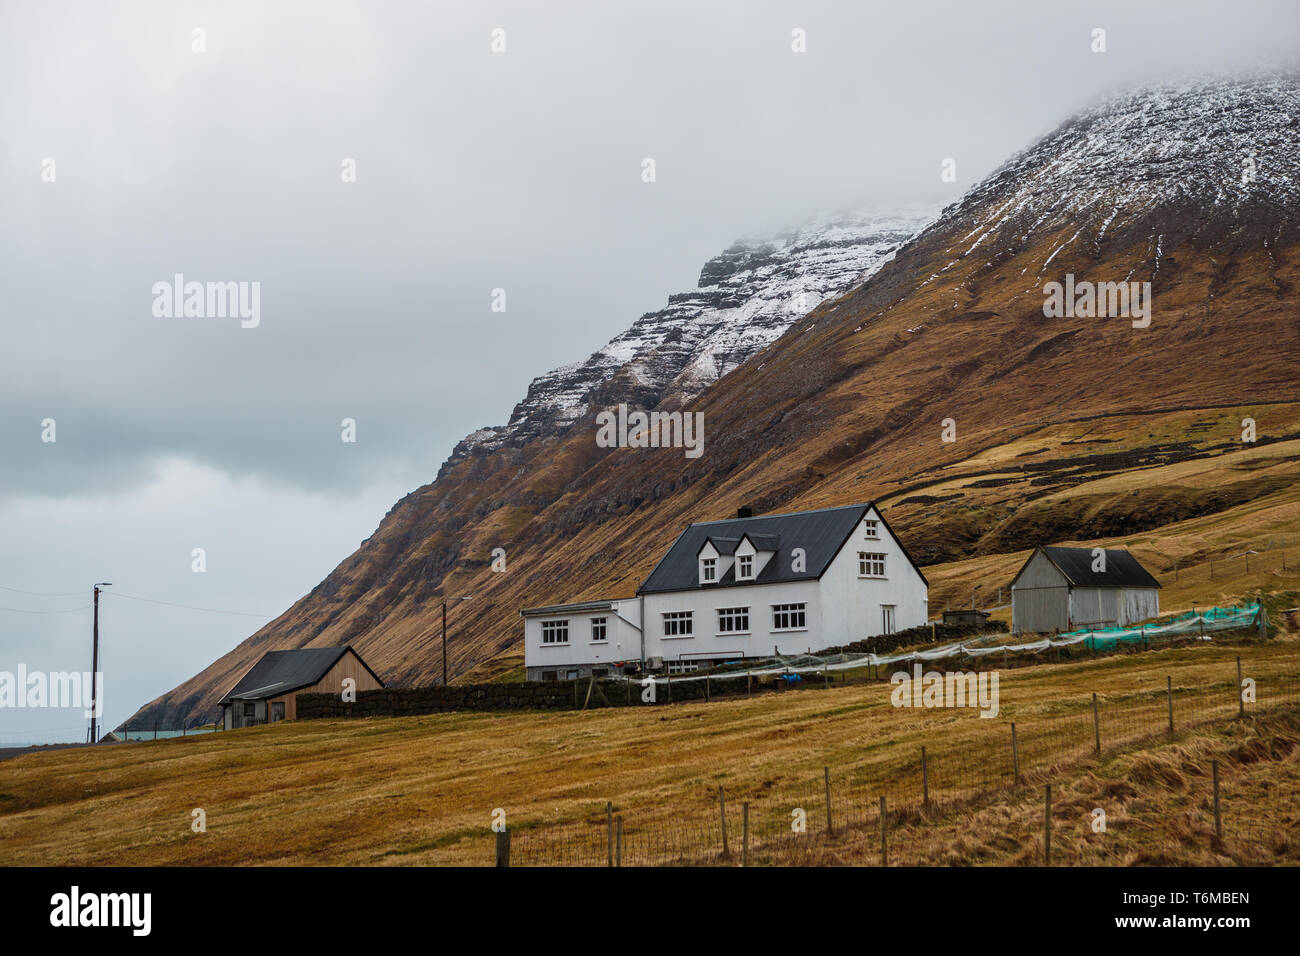 Typical Faroese white wooden house in Viðareiði with fog and snow-covered mountains (Kap Enniberg) in the background (Faroe Islands, Denmark, Europe) Stock Photo